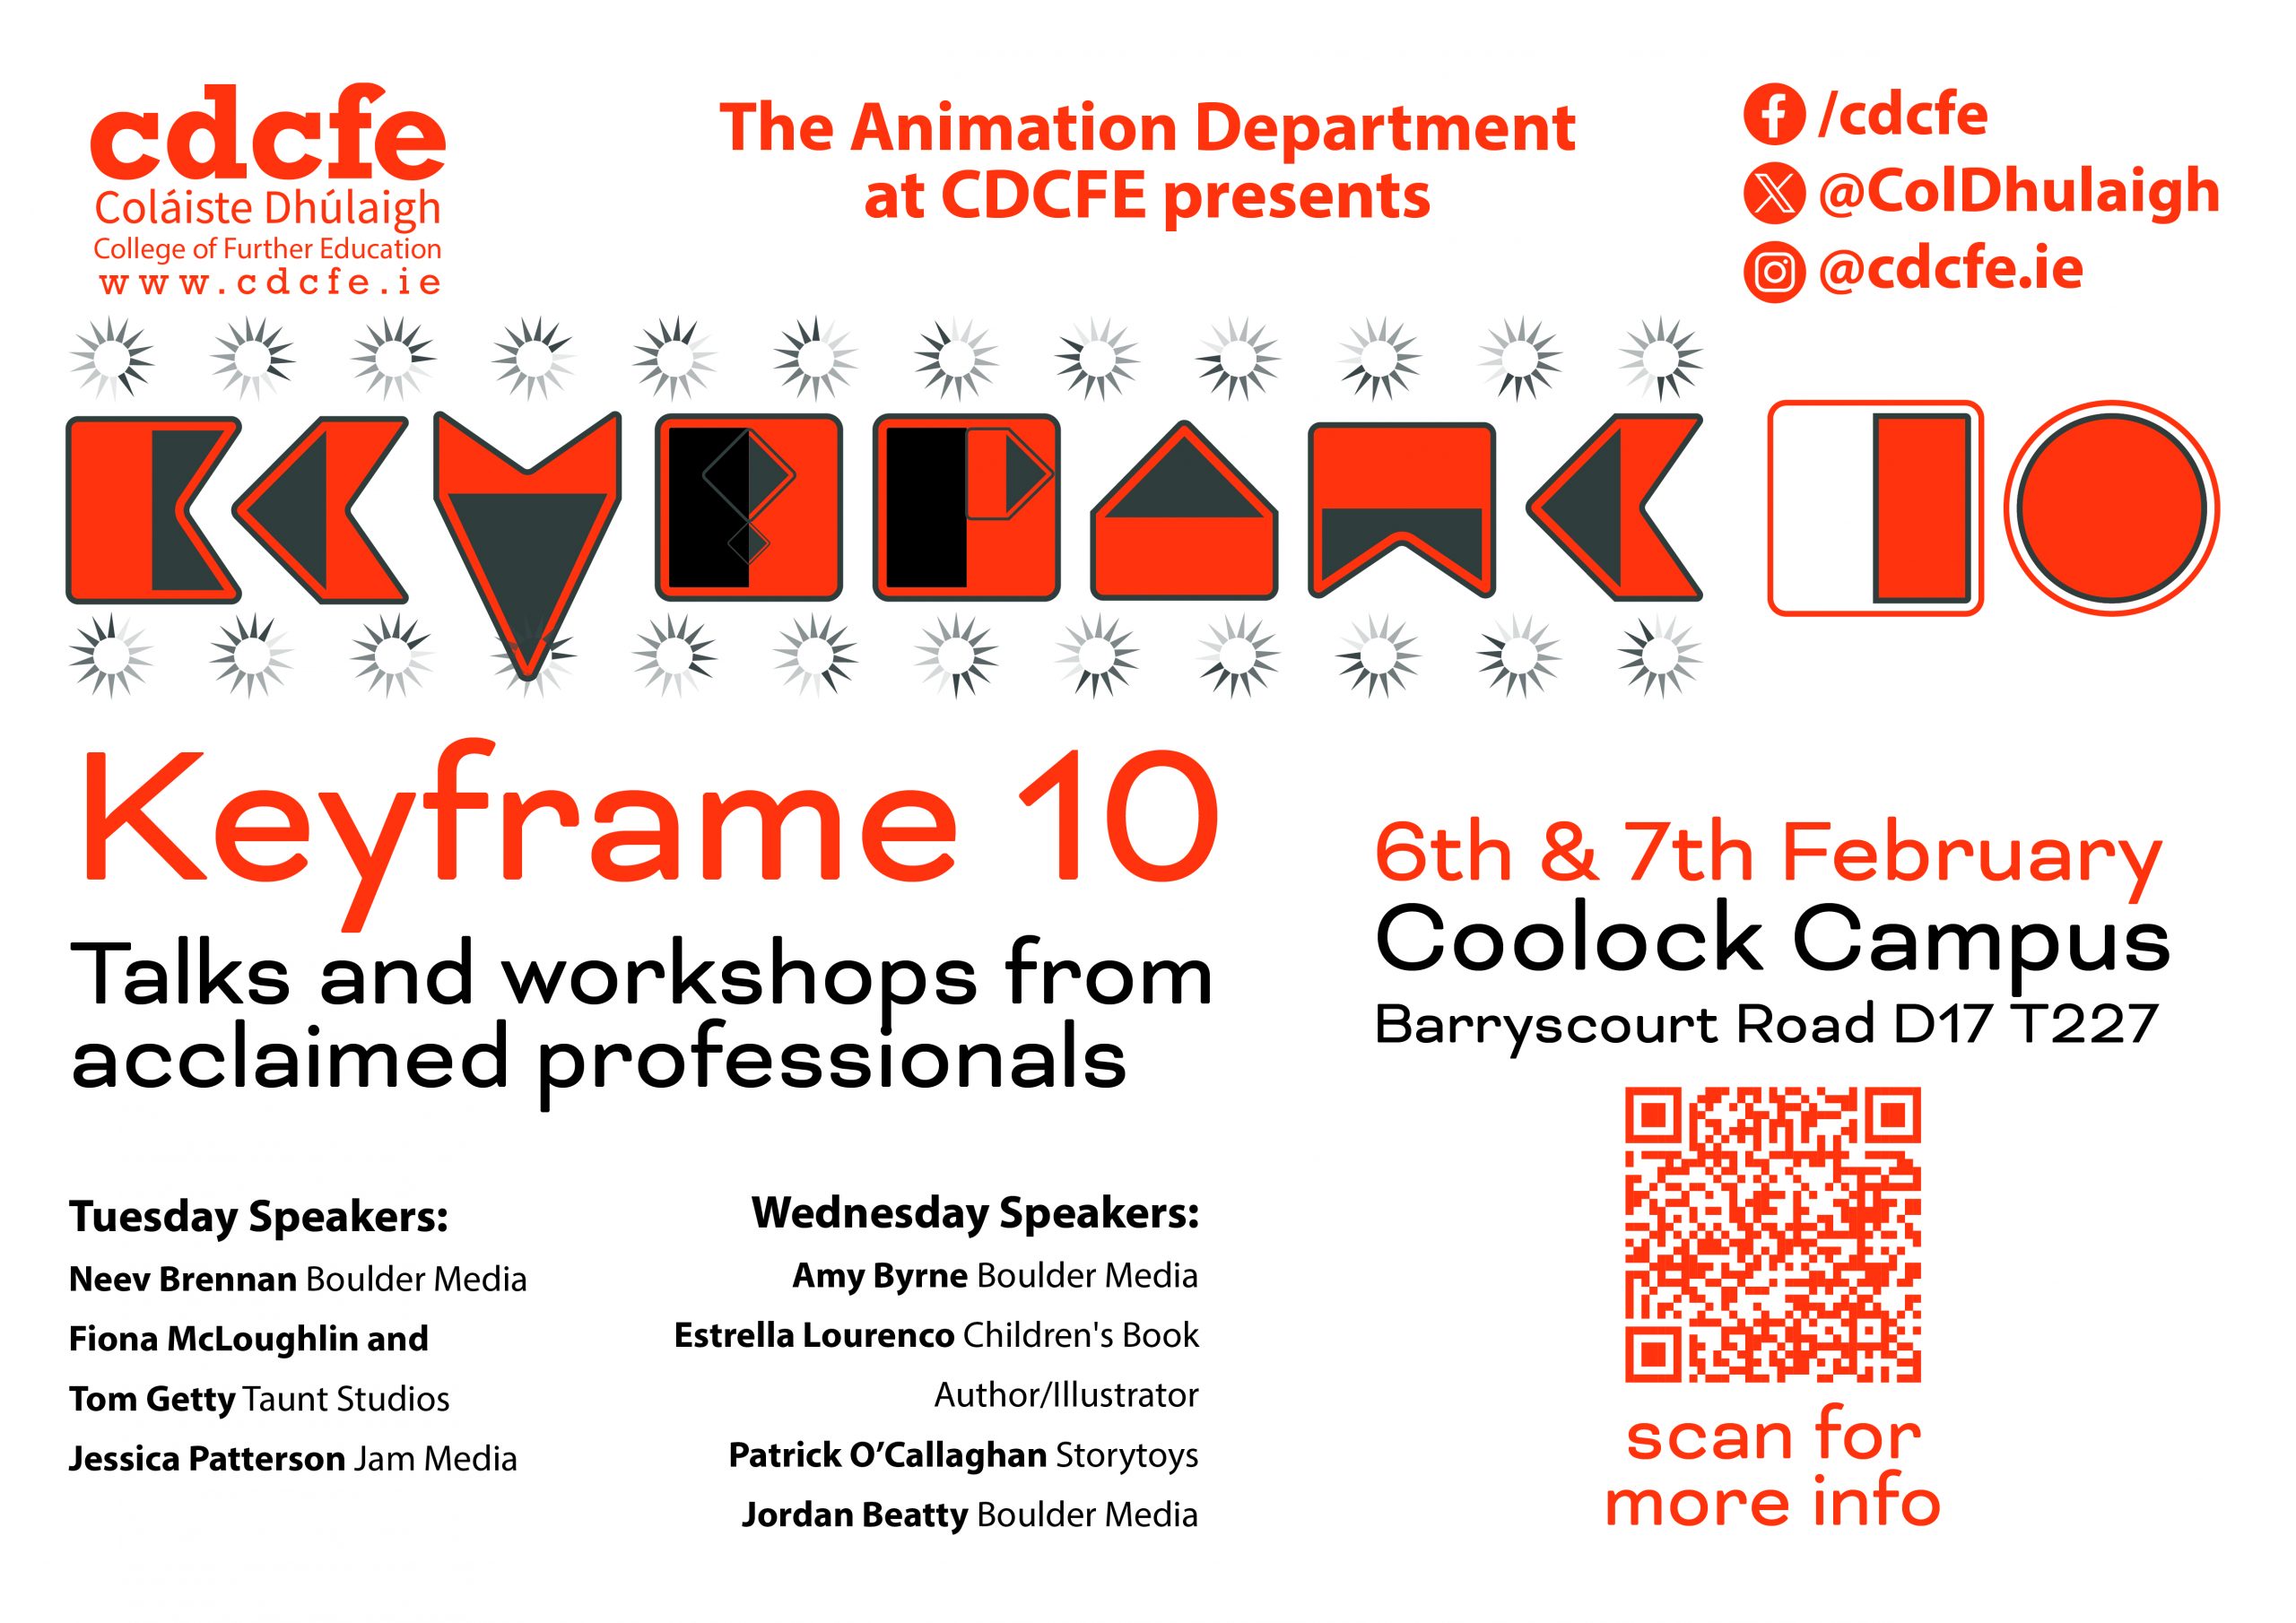 Keyframe 10 - talks and workshops by Animation Industry Professionals at CDCFE